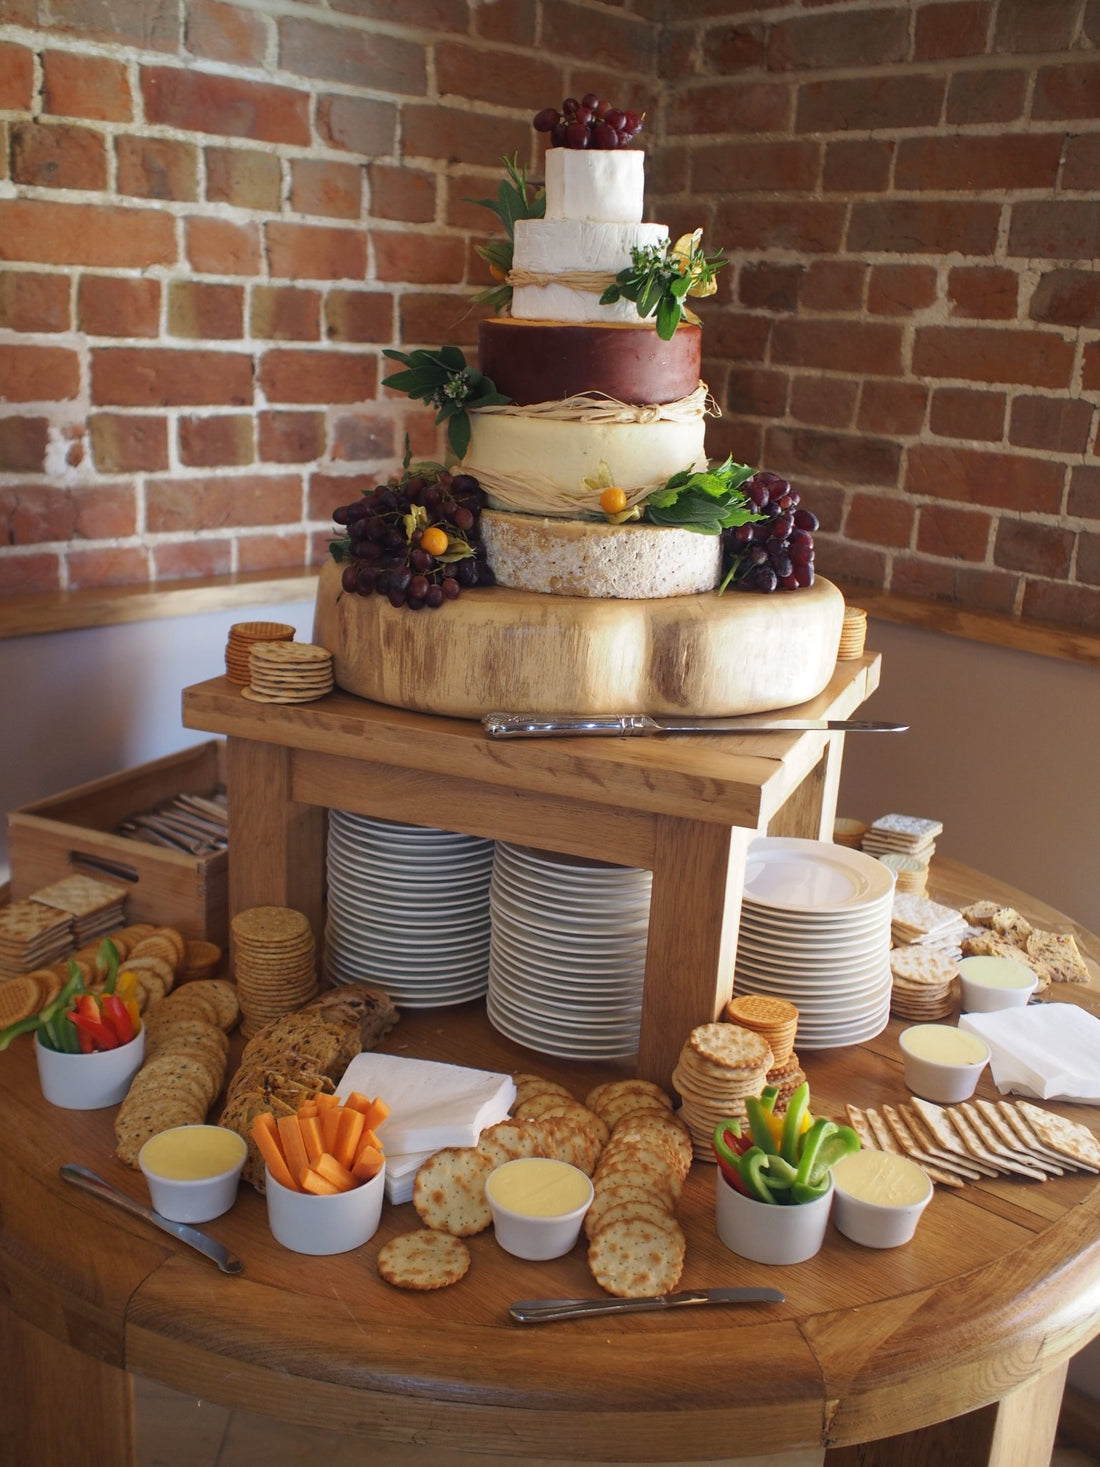 Cheese Wedding Cakes For The Cheese-Loving Couple - Cheese Wedding Cake shop